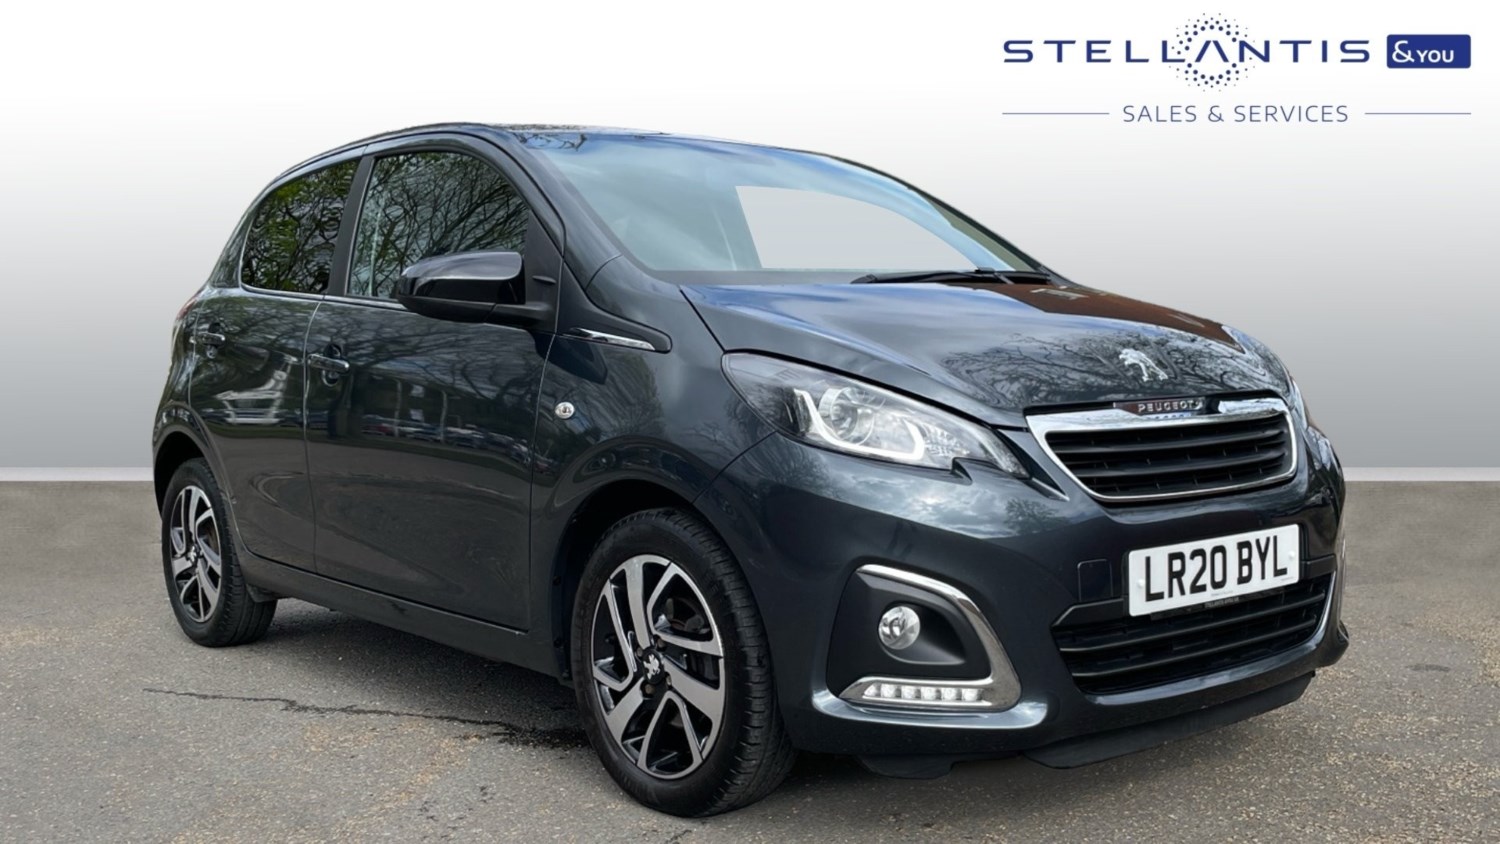 2020 used Peugeot 108 1.0 Allure Euro 6 (s/s) 5dr